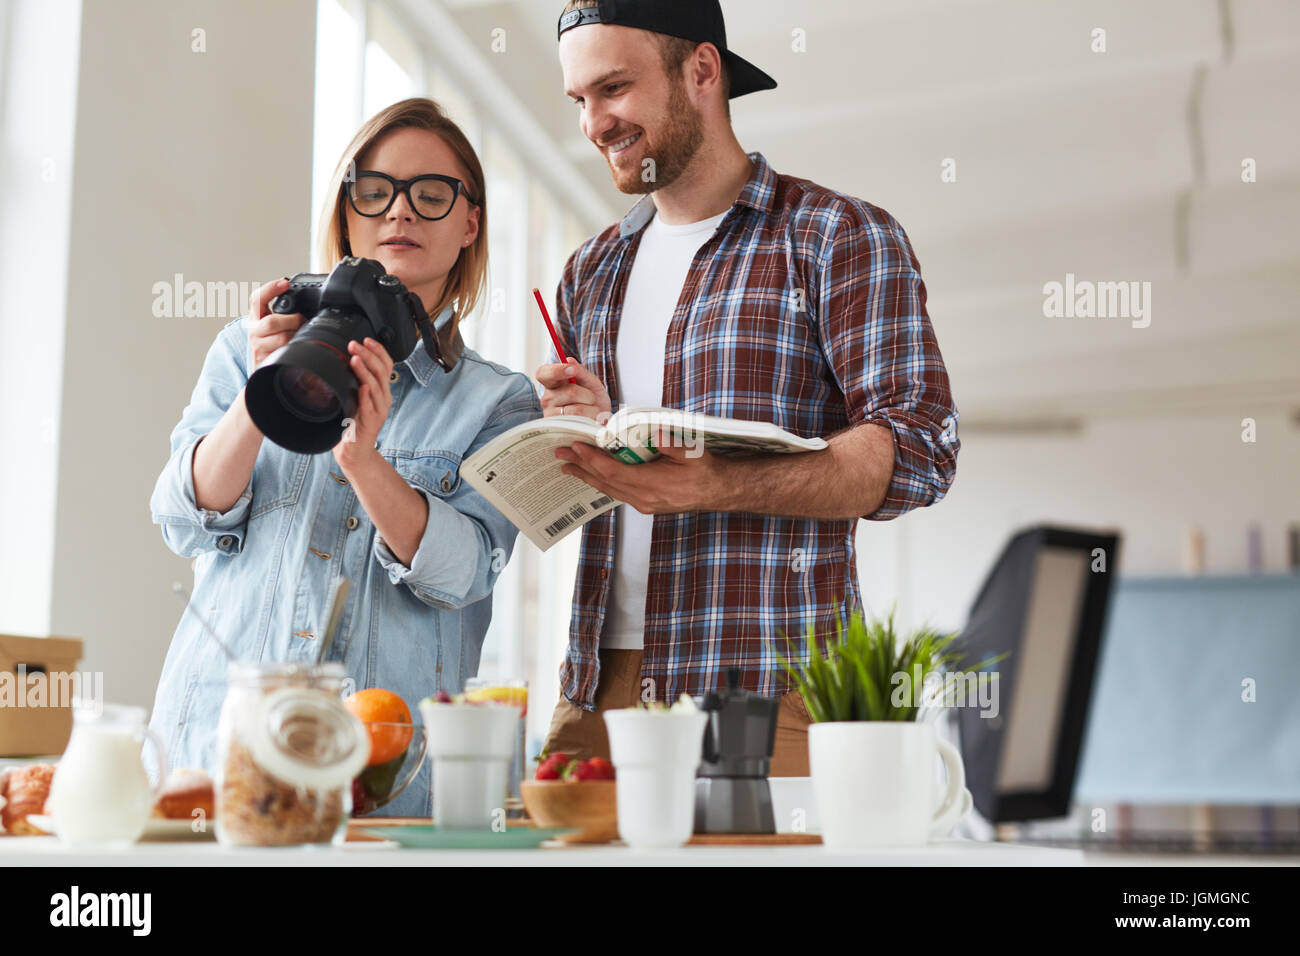 Young woman showing good shots in photocamera to colleague while shooting food Stock Photo